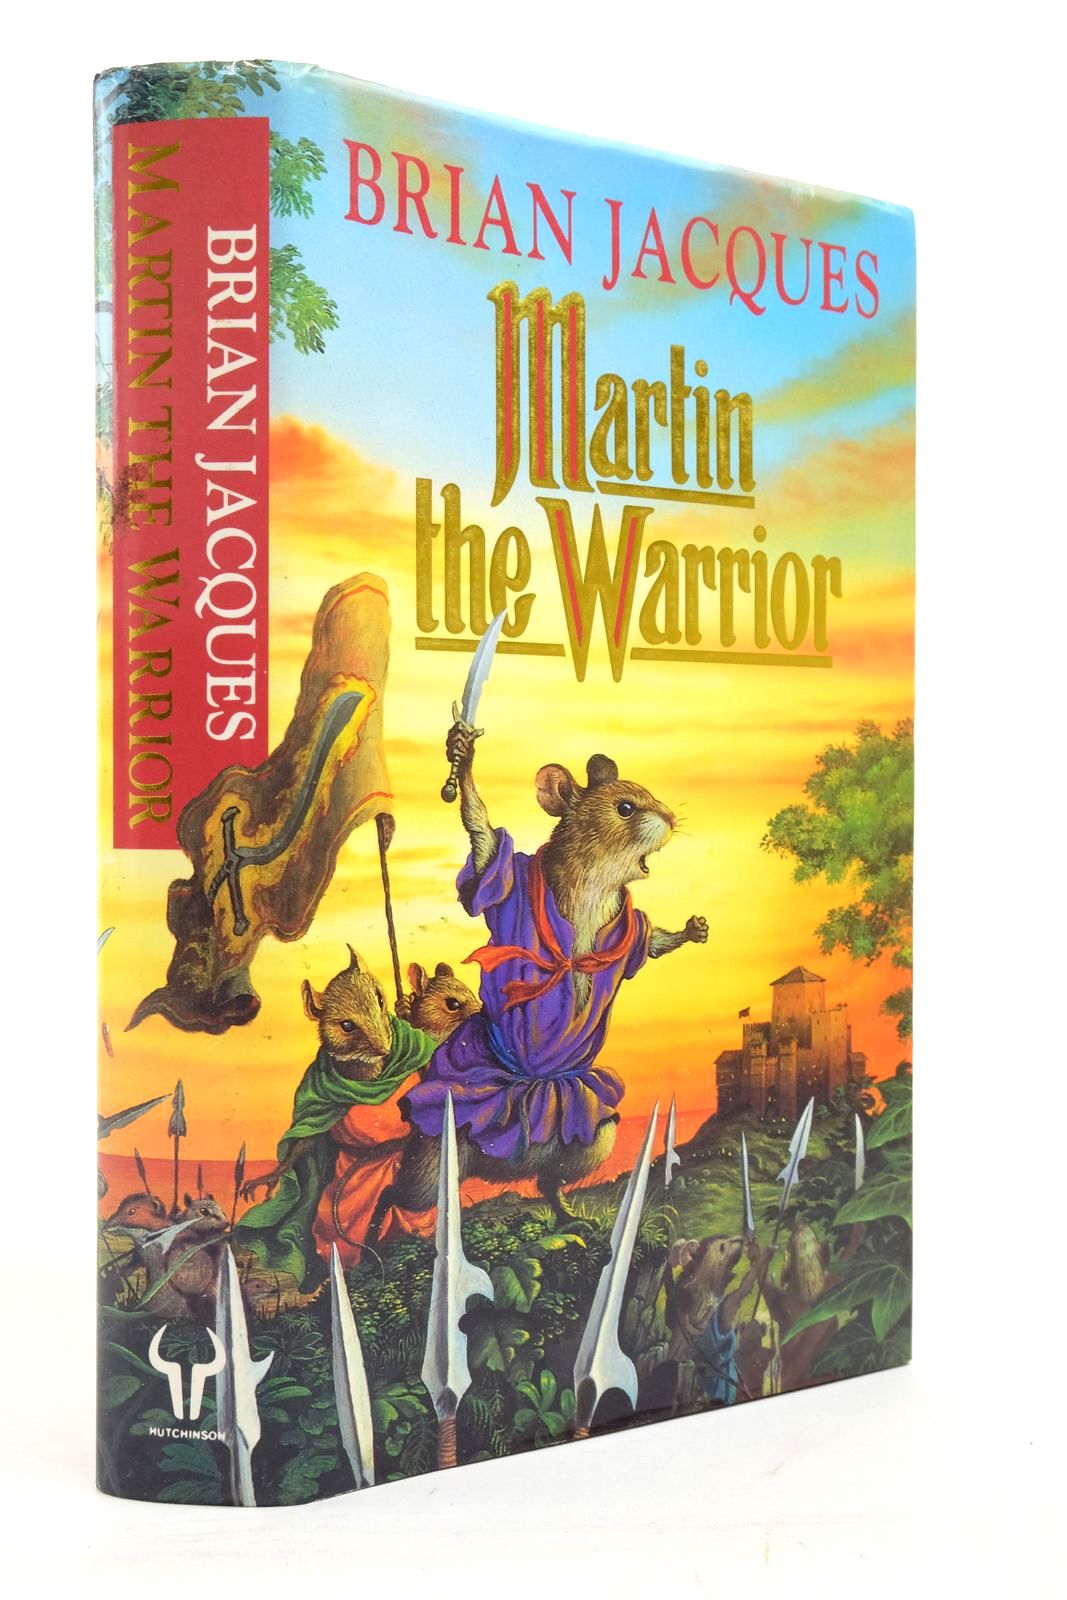 Photo of MARTIN THE WARRIOR written by Jacques, Brian illustrated by Chalk, Gary published by Hutchinson (STOCK CODE: 2137933)  for sale by Stella & Rose's Books